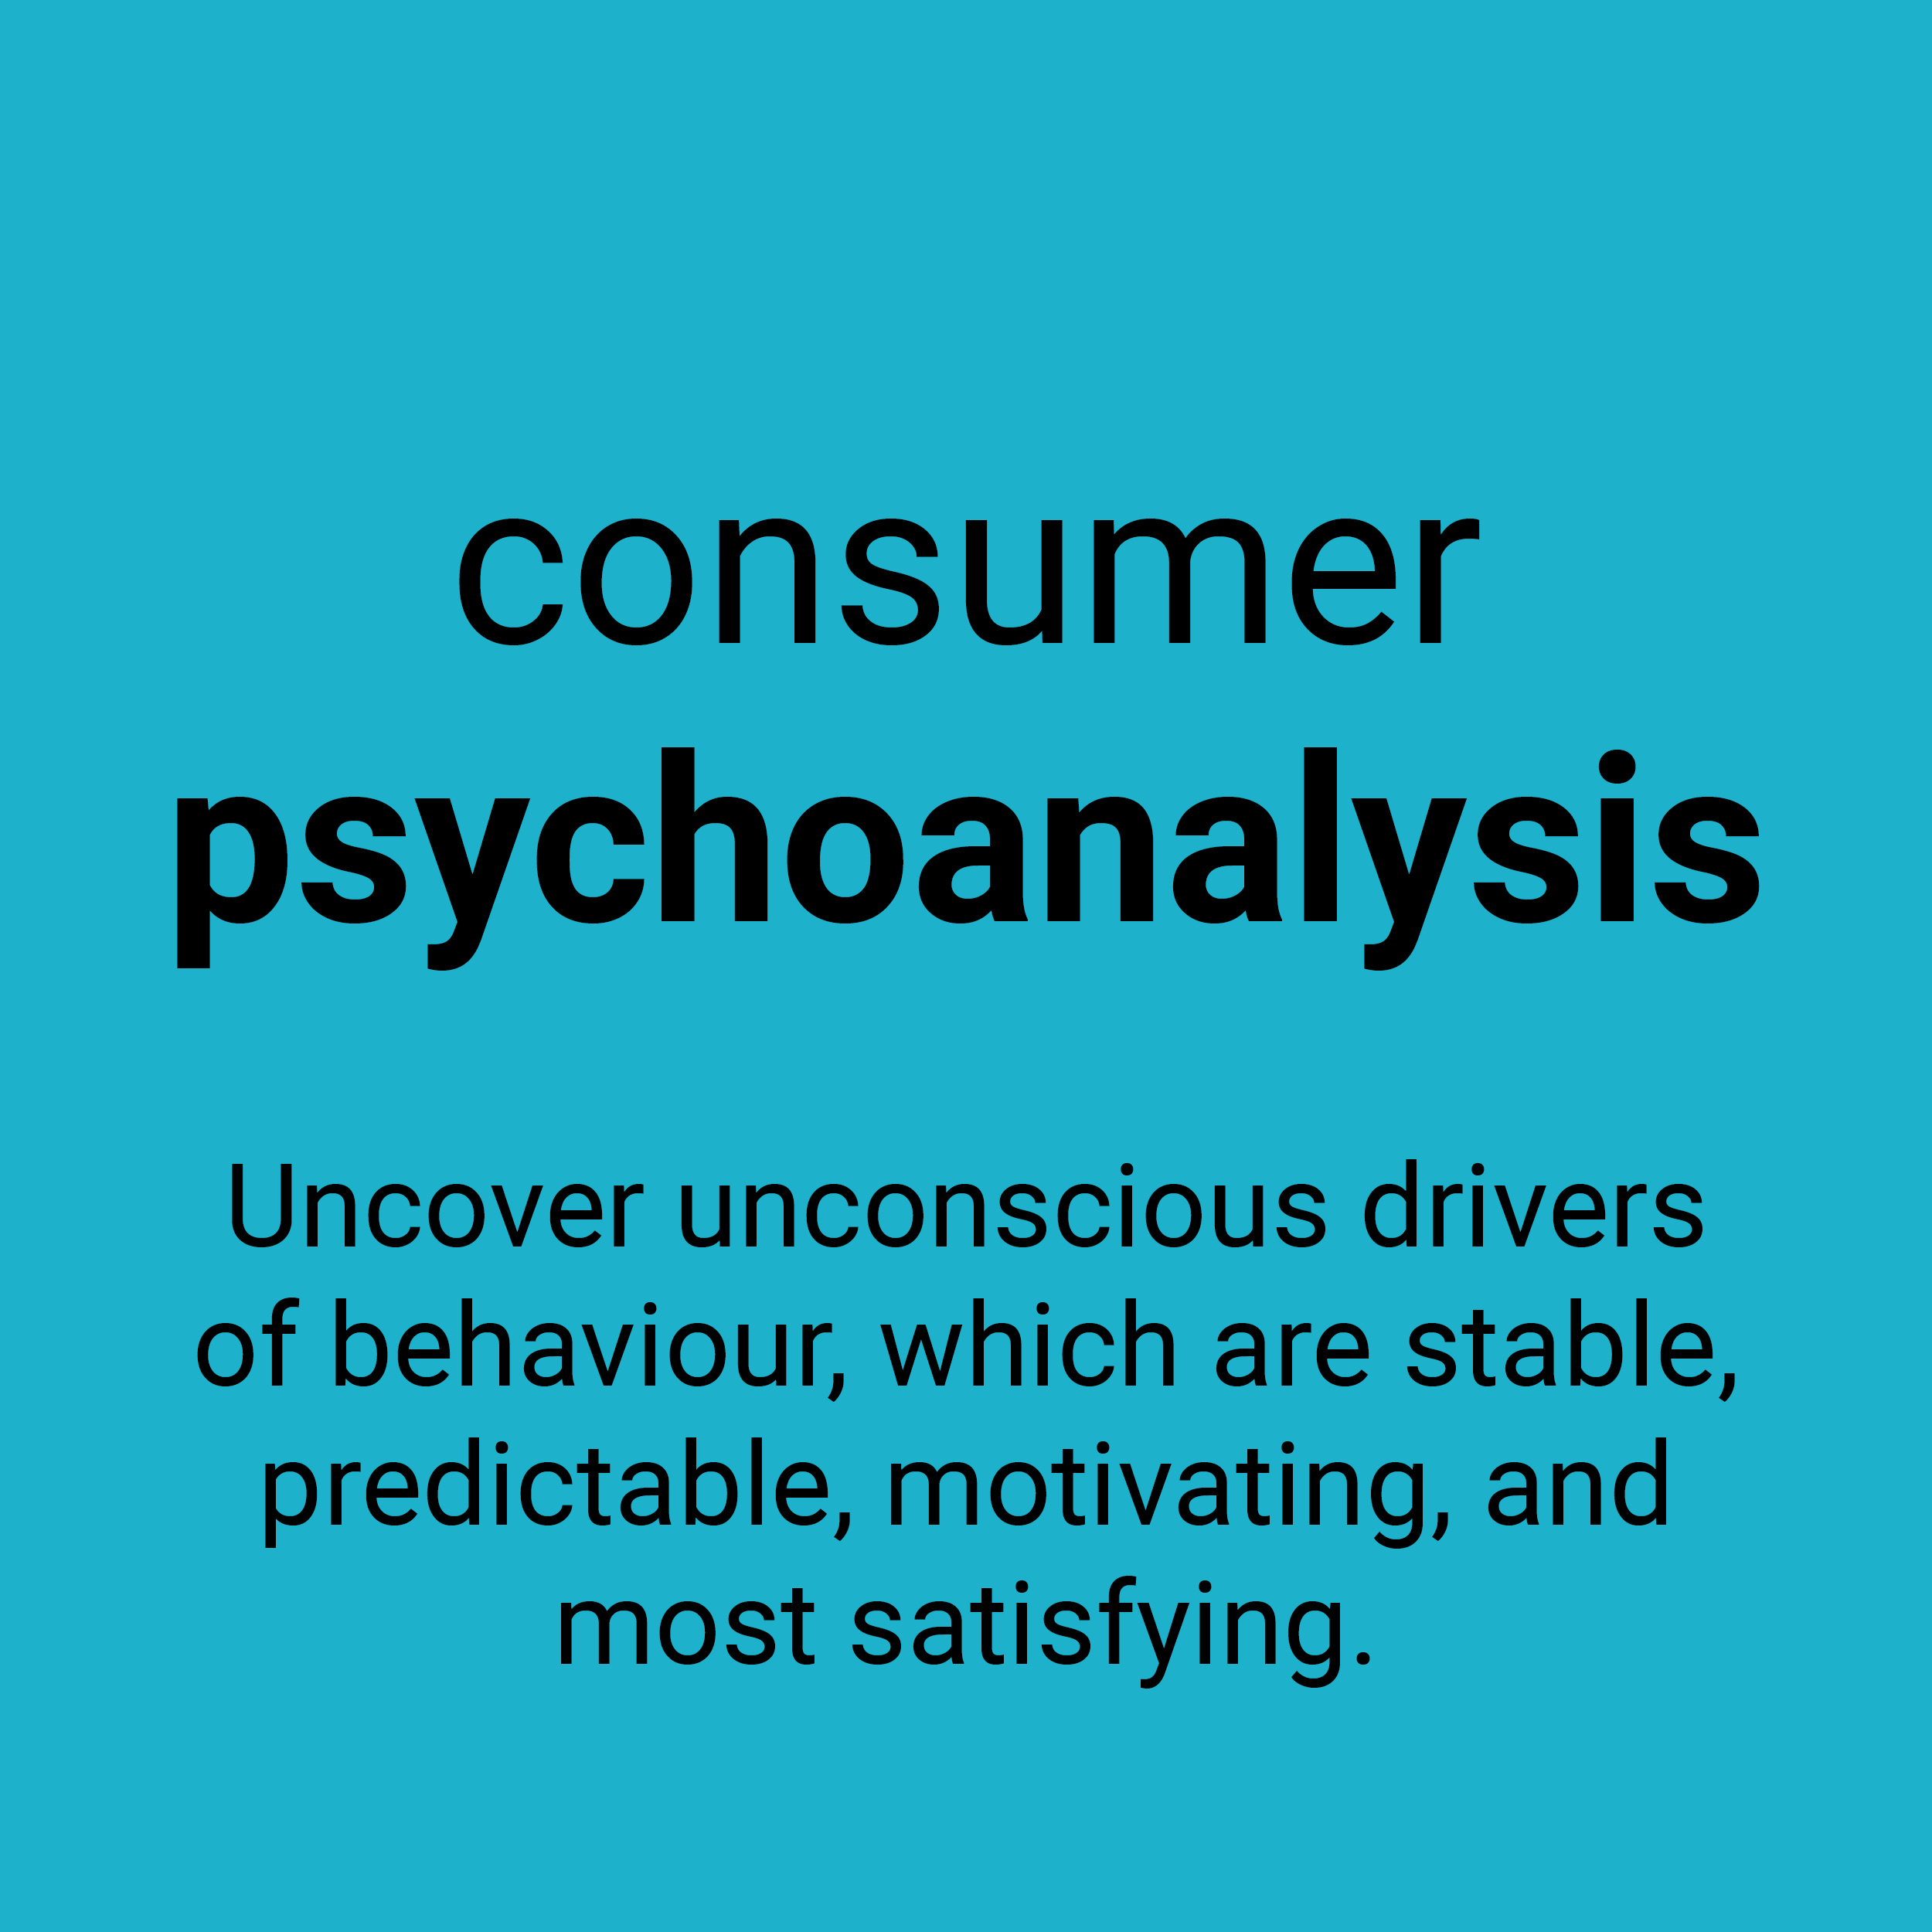 Consumer psychoanalysis. Uncover unconscious drivers of behaviour, which are stable, predictable, motivating, and most satisfying.